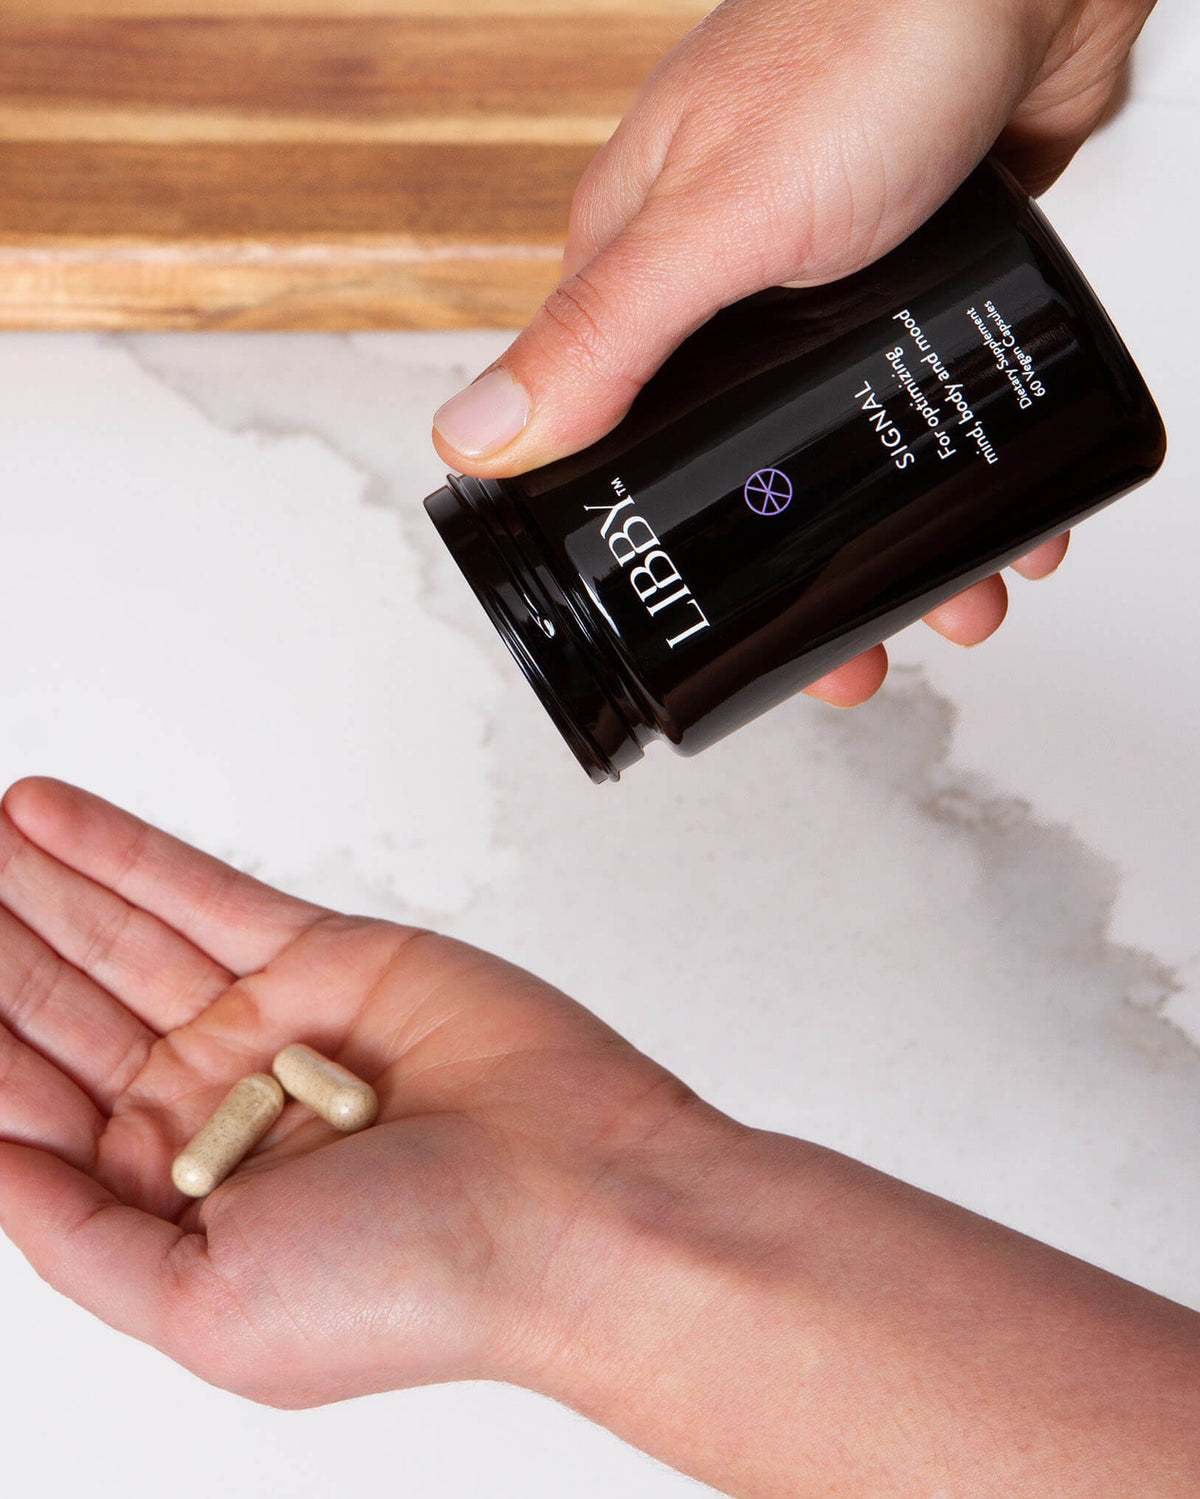 Signal supplement from Libby being poured from black bottle into palm of hand.